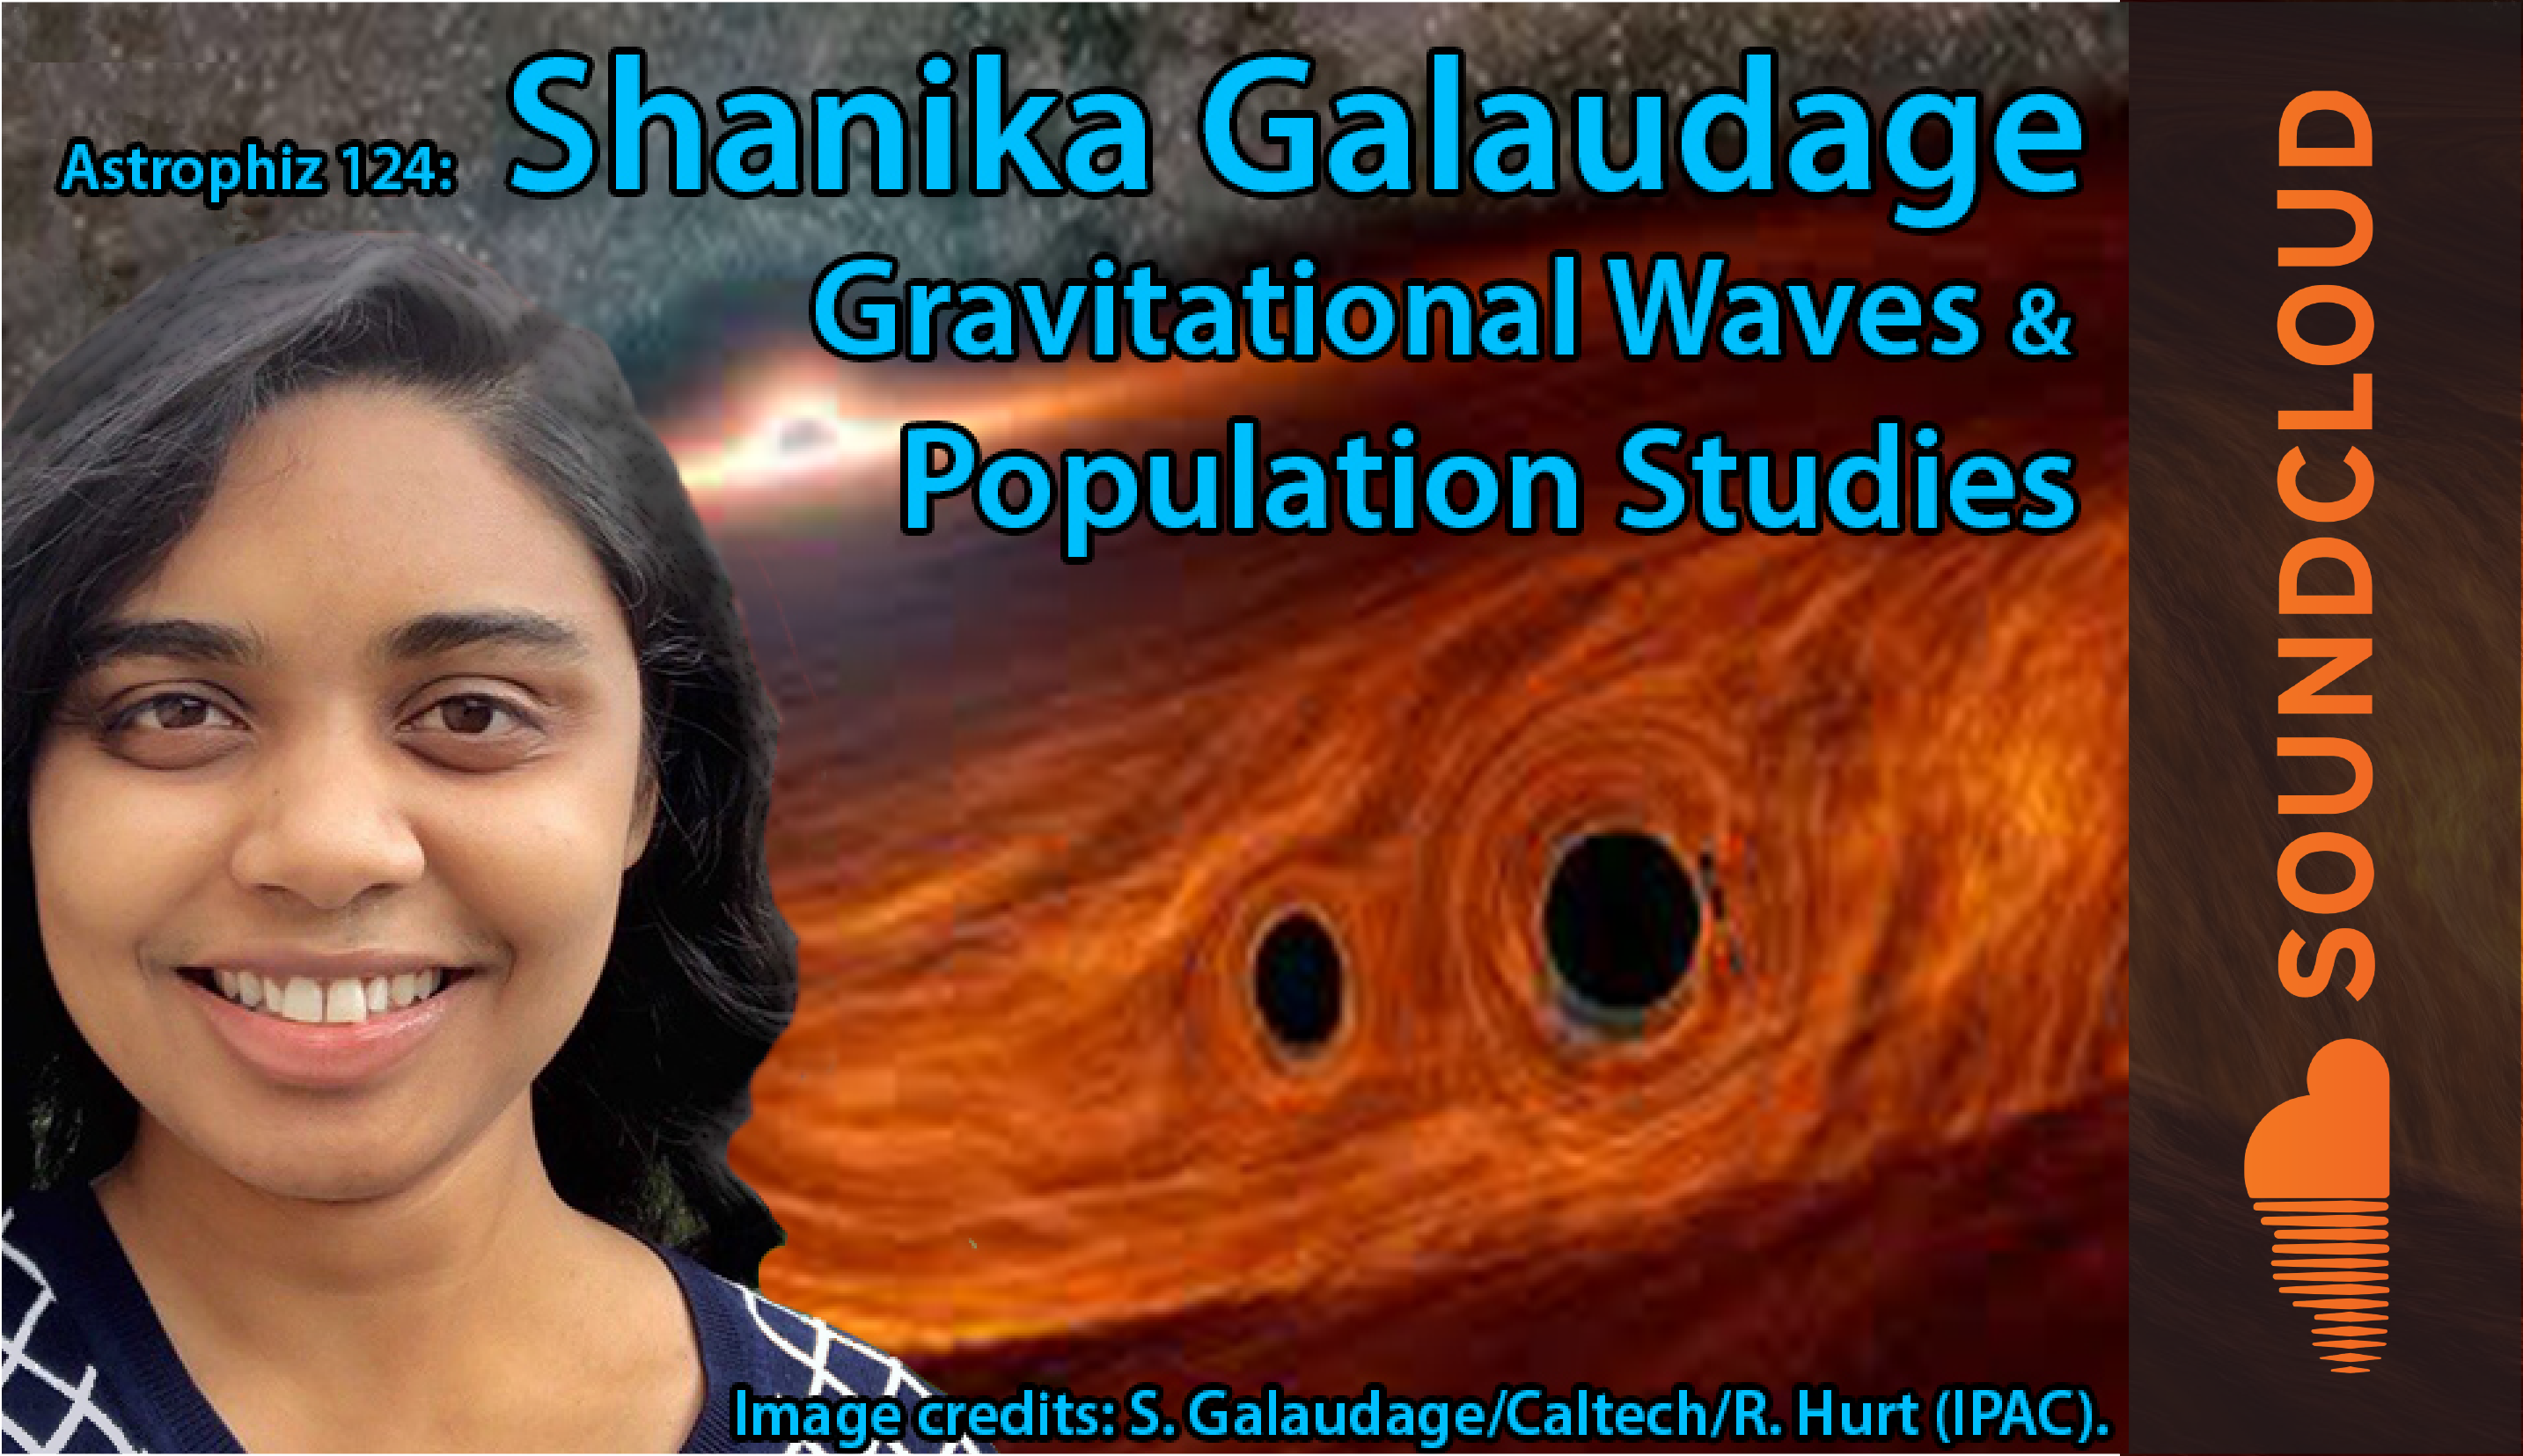 Graphic with image of Shanika on the left in the foreground and an image of merging black holes in the background.